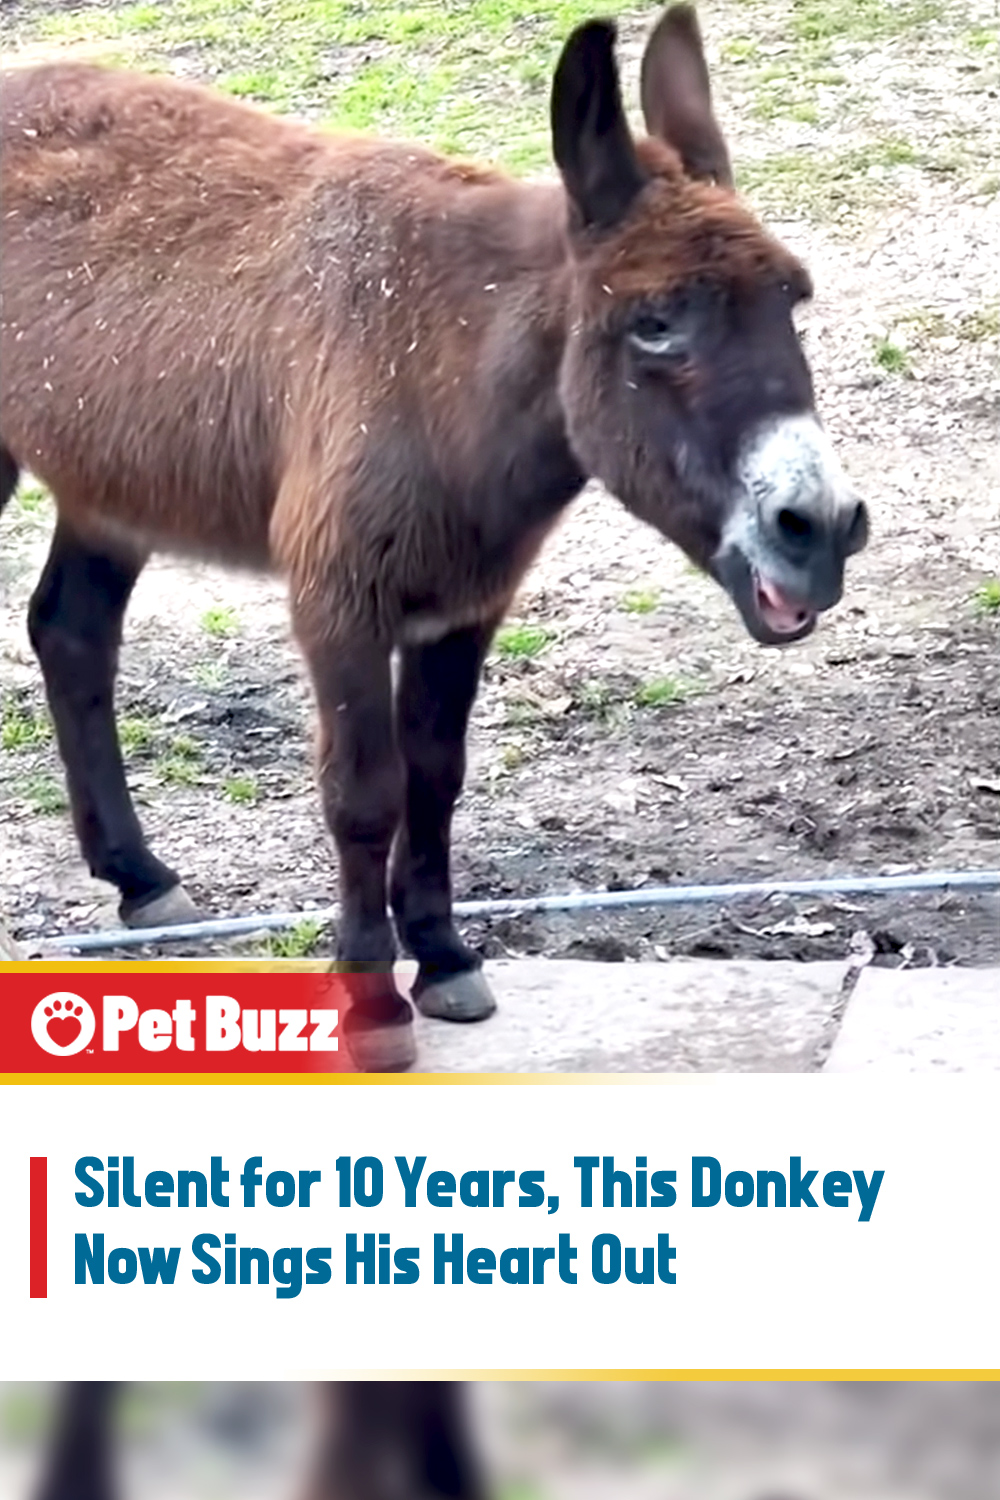 Silent for 10 Years, This Donkey Now Sings His Heart Out